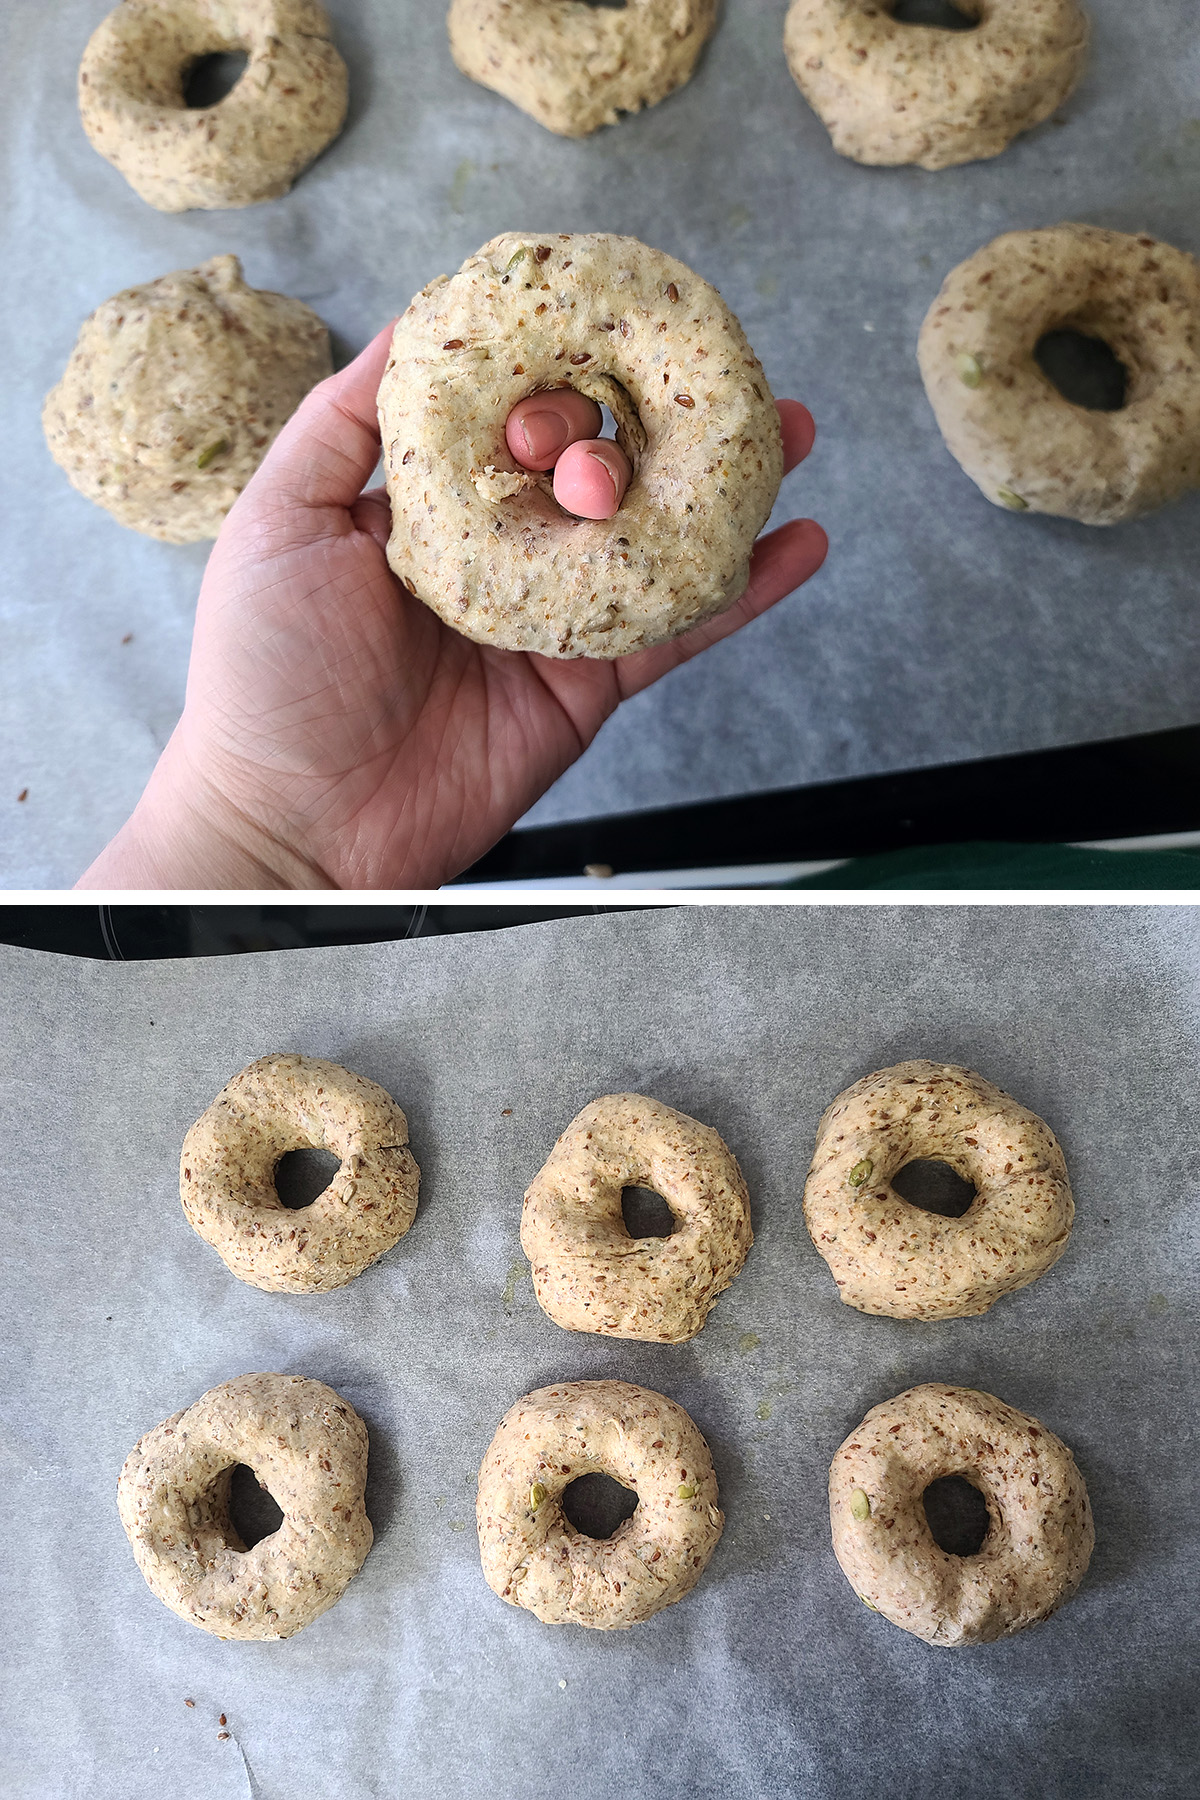 A two part image showing a hand holding a ball of dough that's been shaped into a bagel, and then 6 formed bagels on a parchment lined surface.